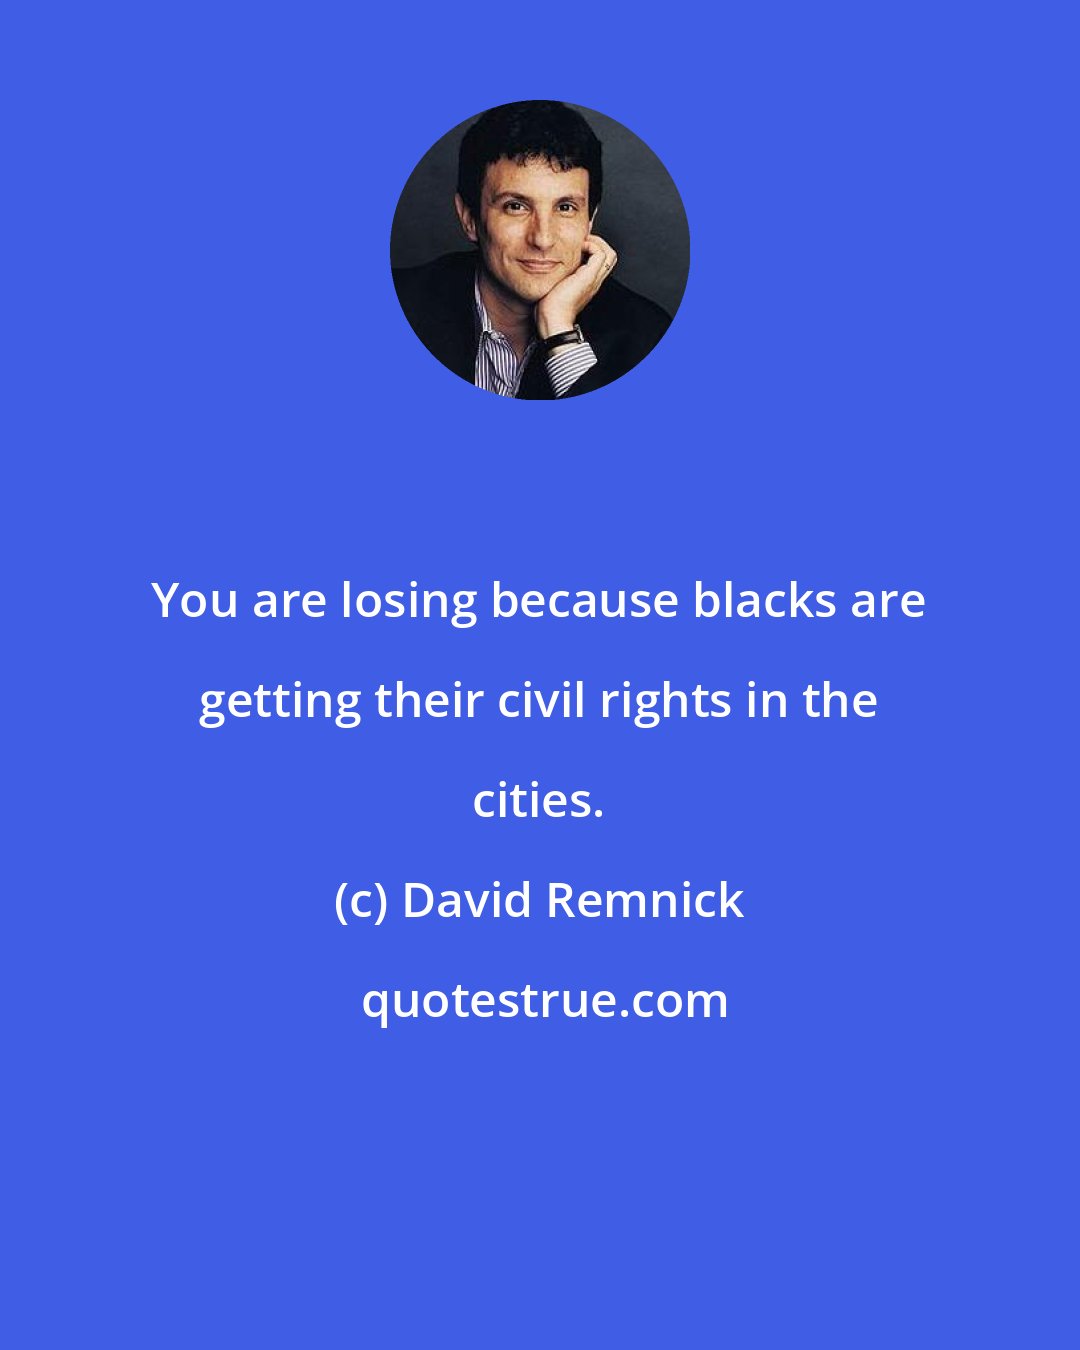 David Remnick: You are losing because blacks are getting their civil rights in the cities.